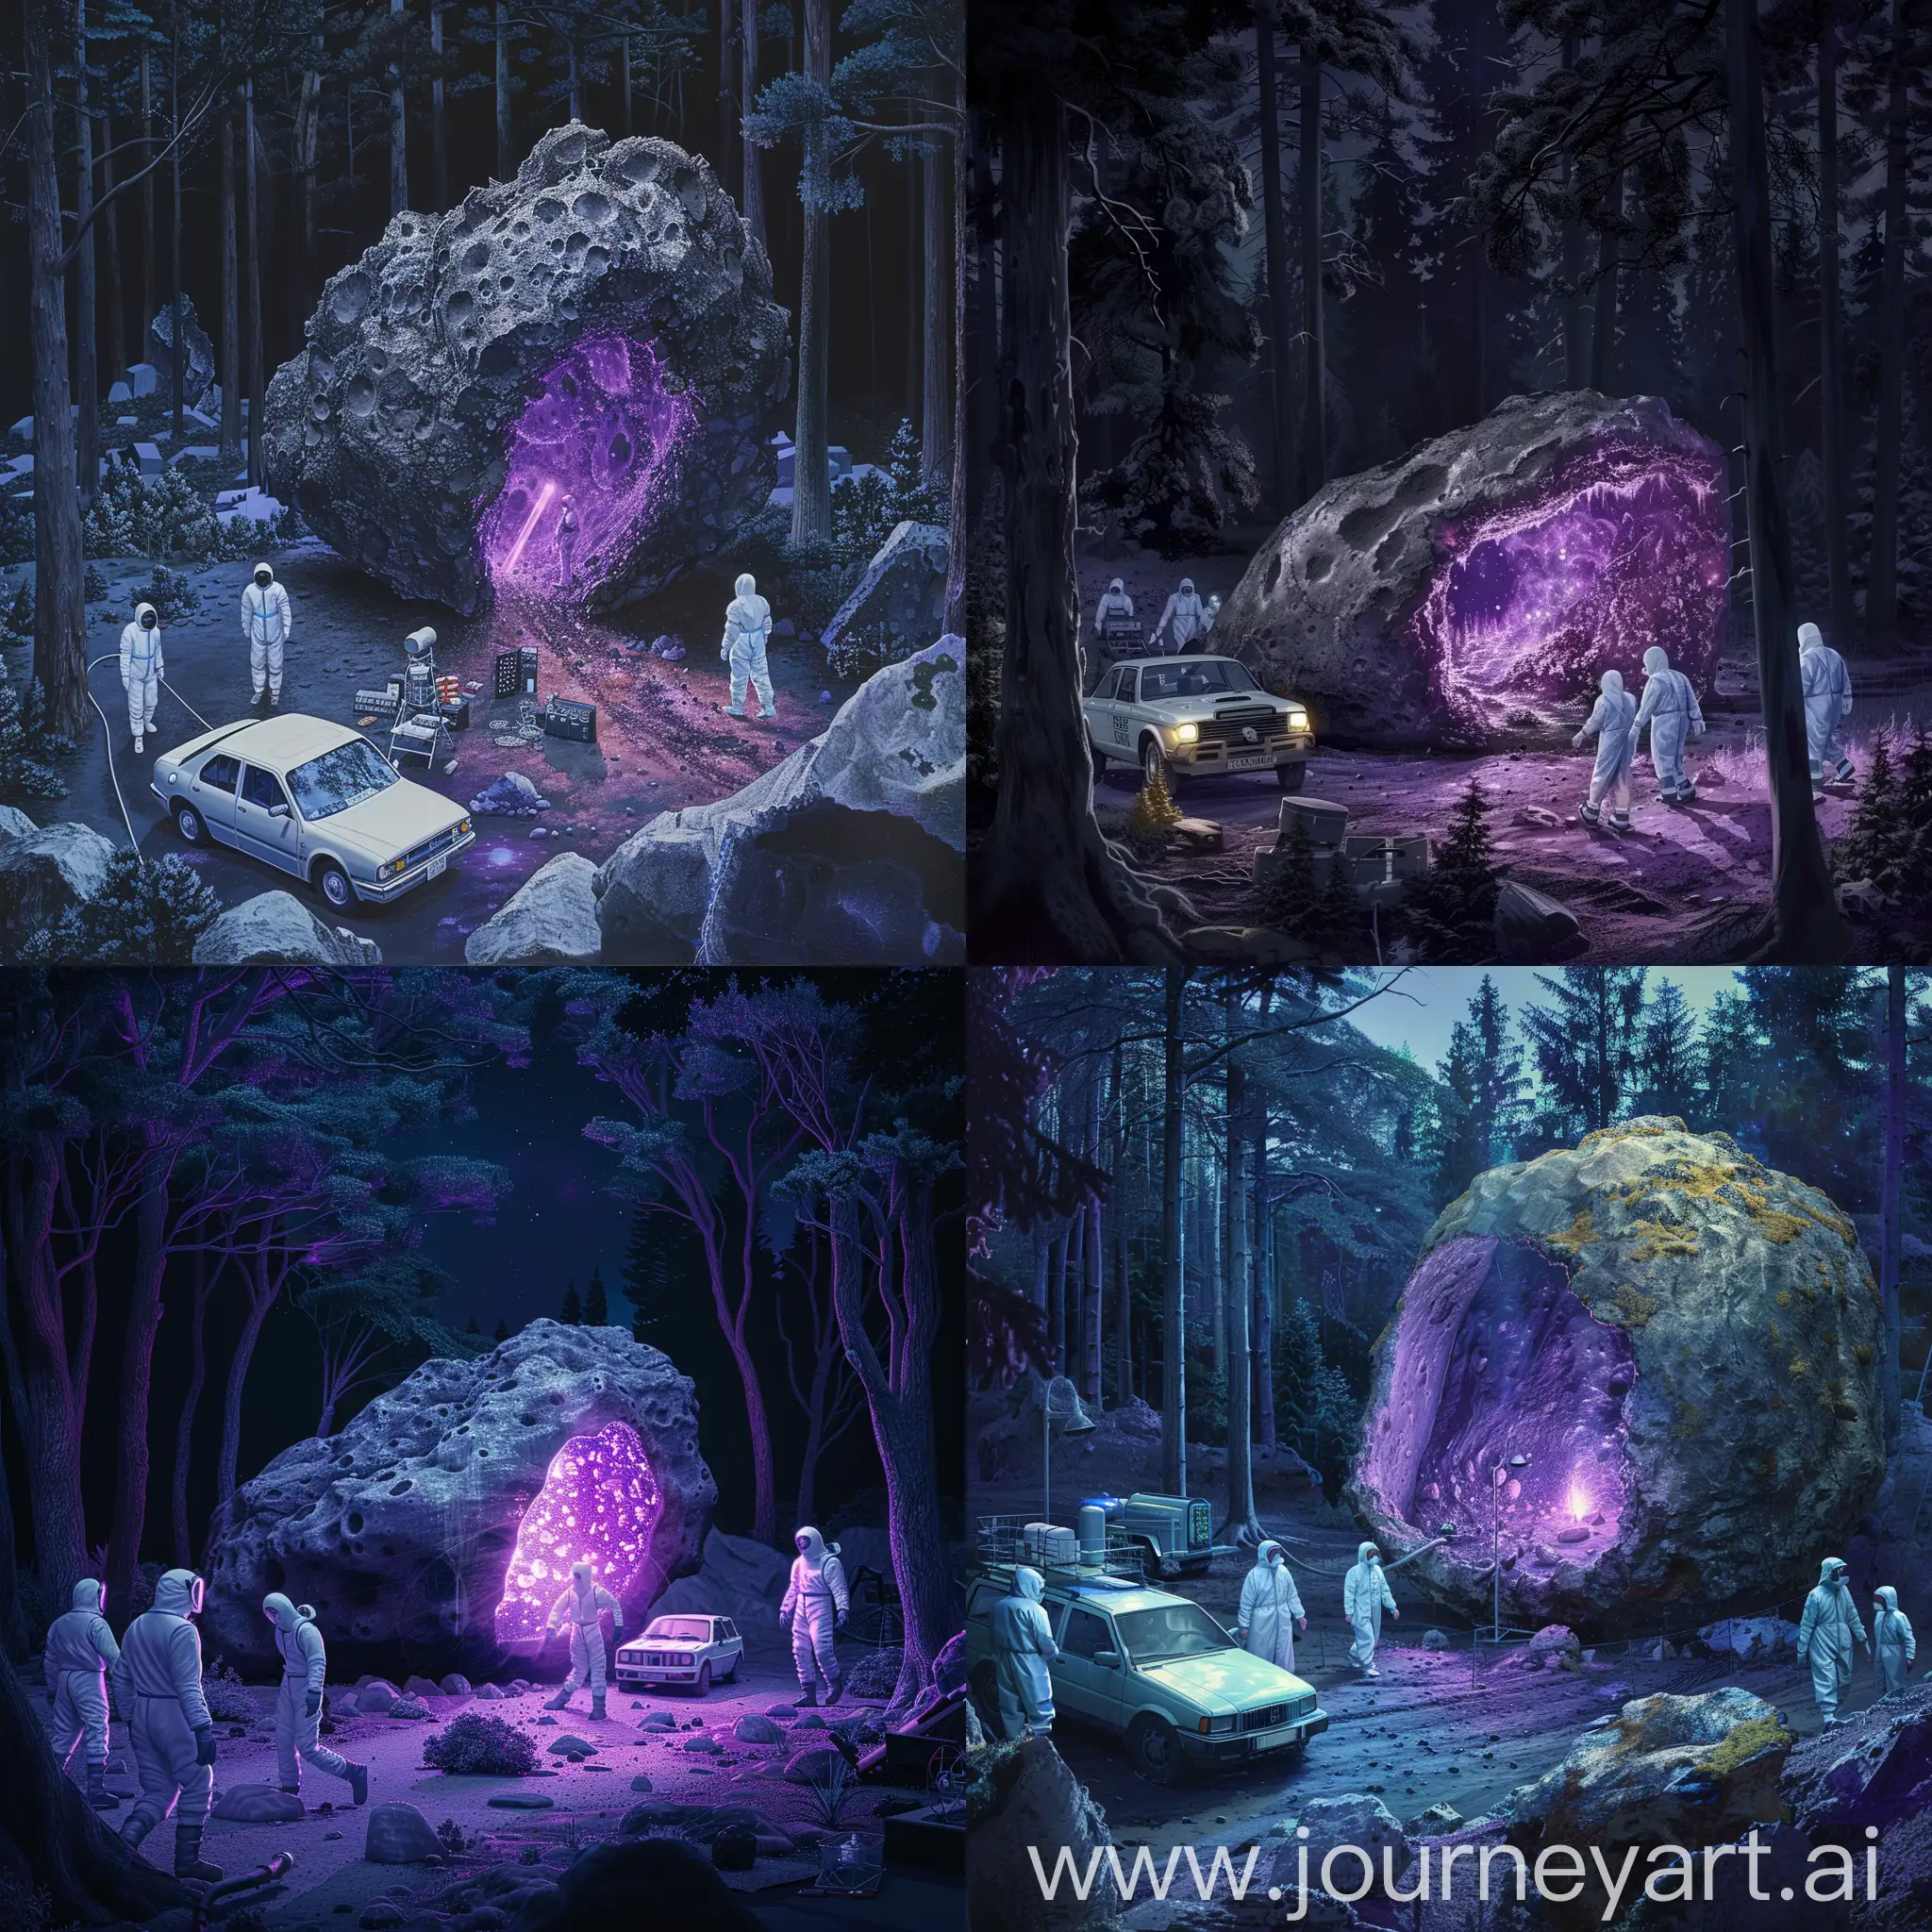 Scientists-in-White-Overalls-Explore-Dimly-Glowing-Purple-Asteroid-in-Night-Forest